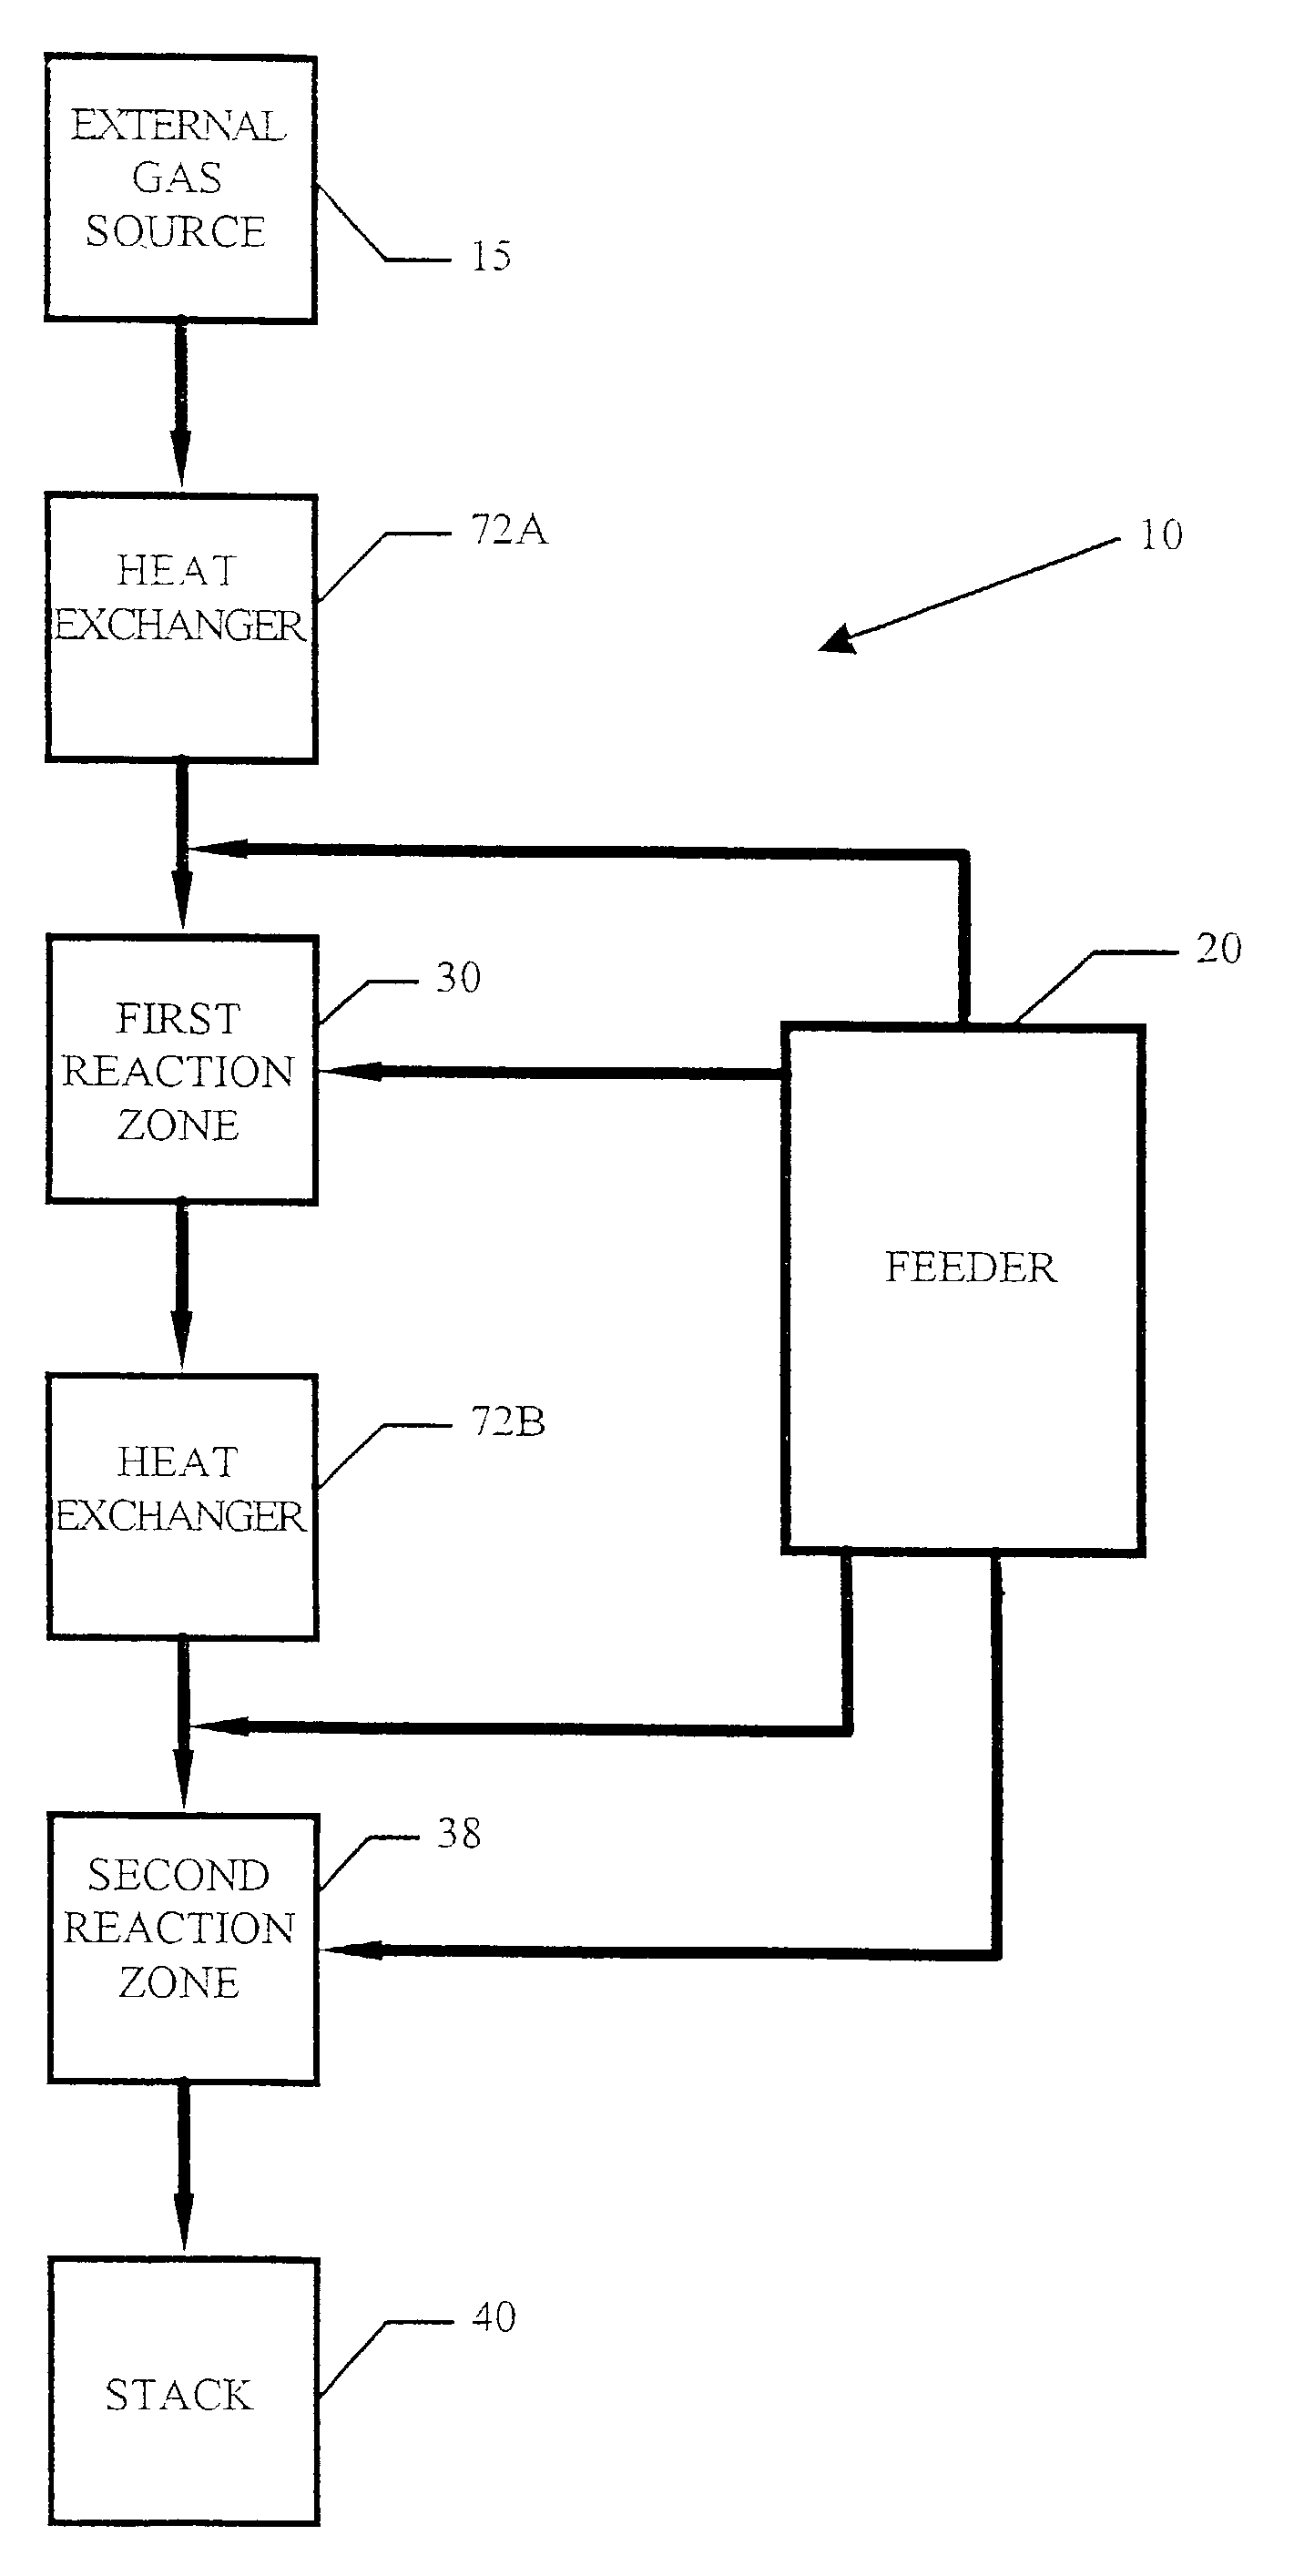 System and process for removal of pollutants from a gas stream